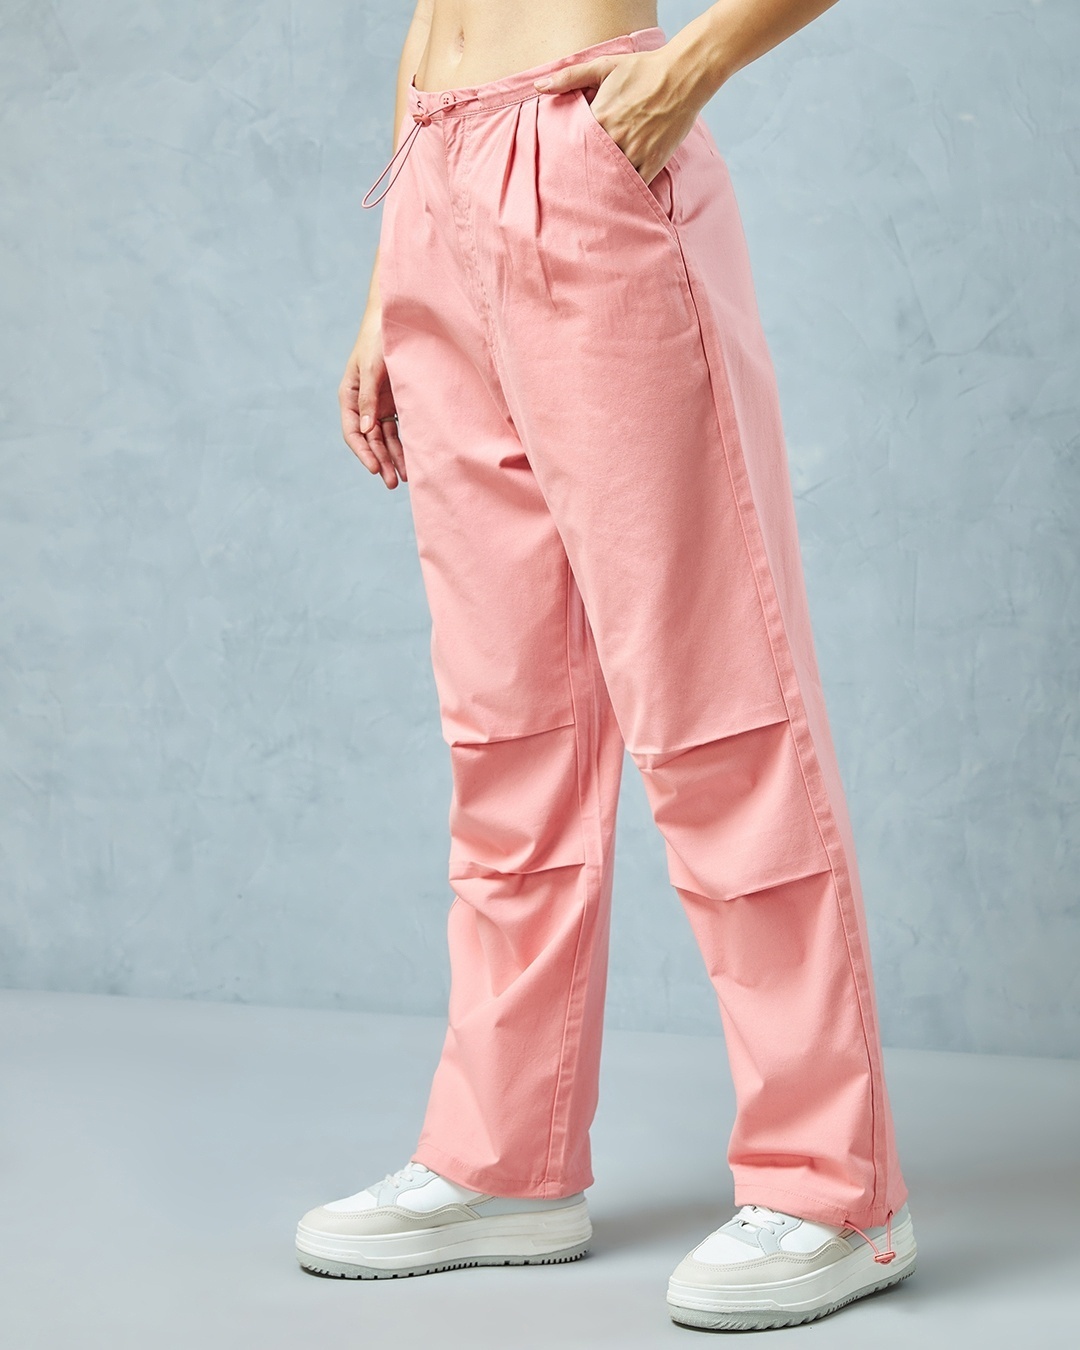 Pink Loose Tuxedo Pink Trouser Suit For Women Perfect For Evening Parties,  Weddings, And Formal Work Wear From Greatvip, $66.99 | DHgate.Com